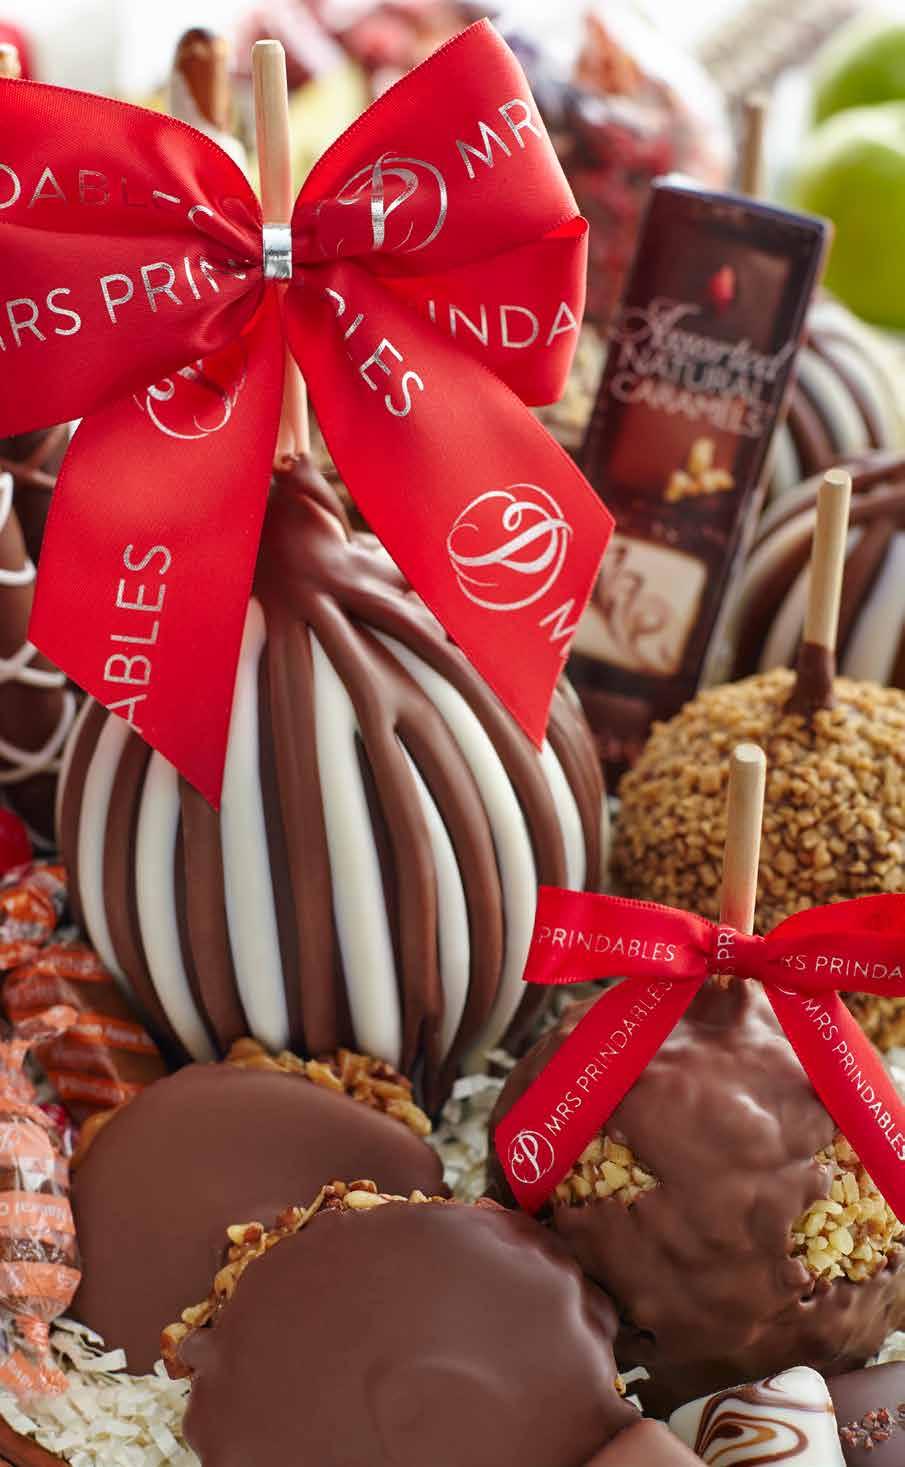 99 Colossal Holiday Caramel Apple Gift Basket The largest gathering of Mrs Prindables indulgences in one colossal basket include: one Triple